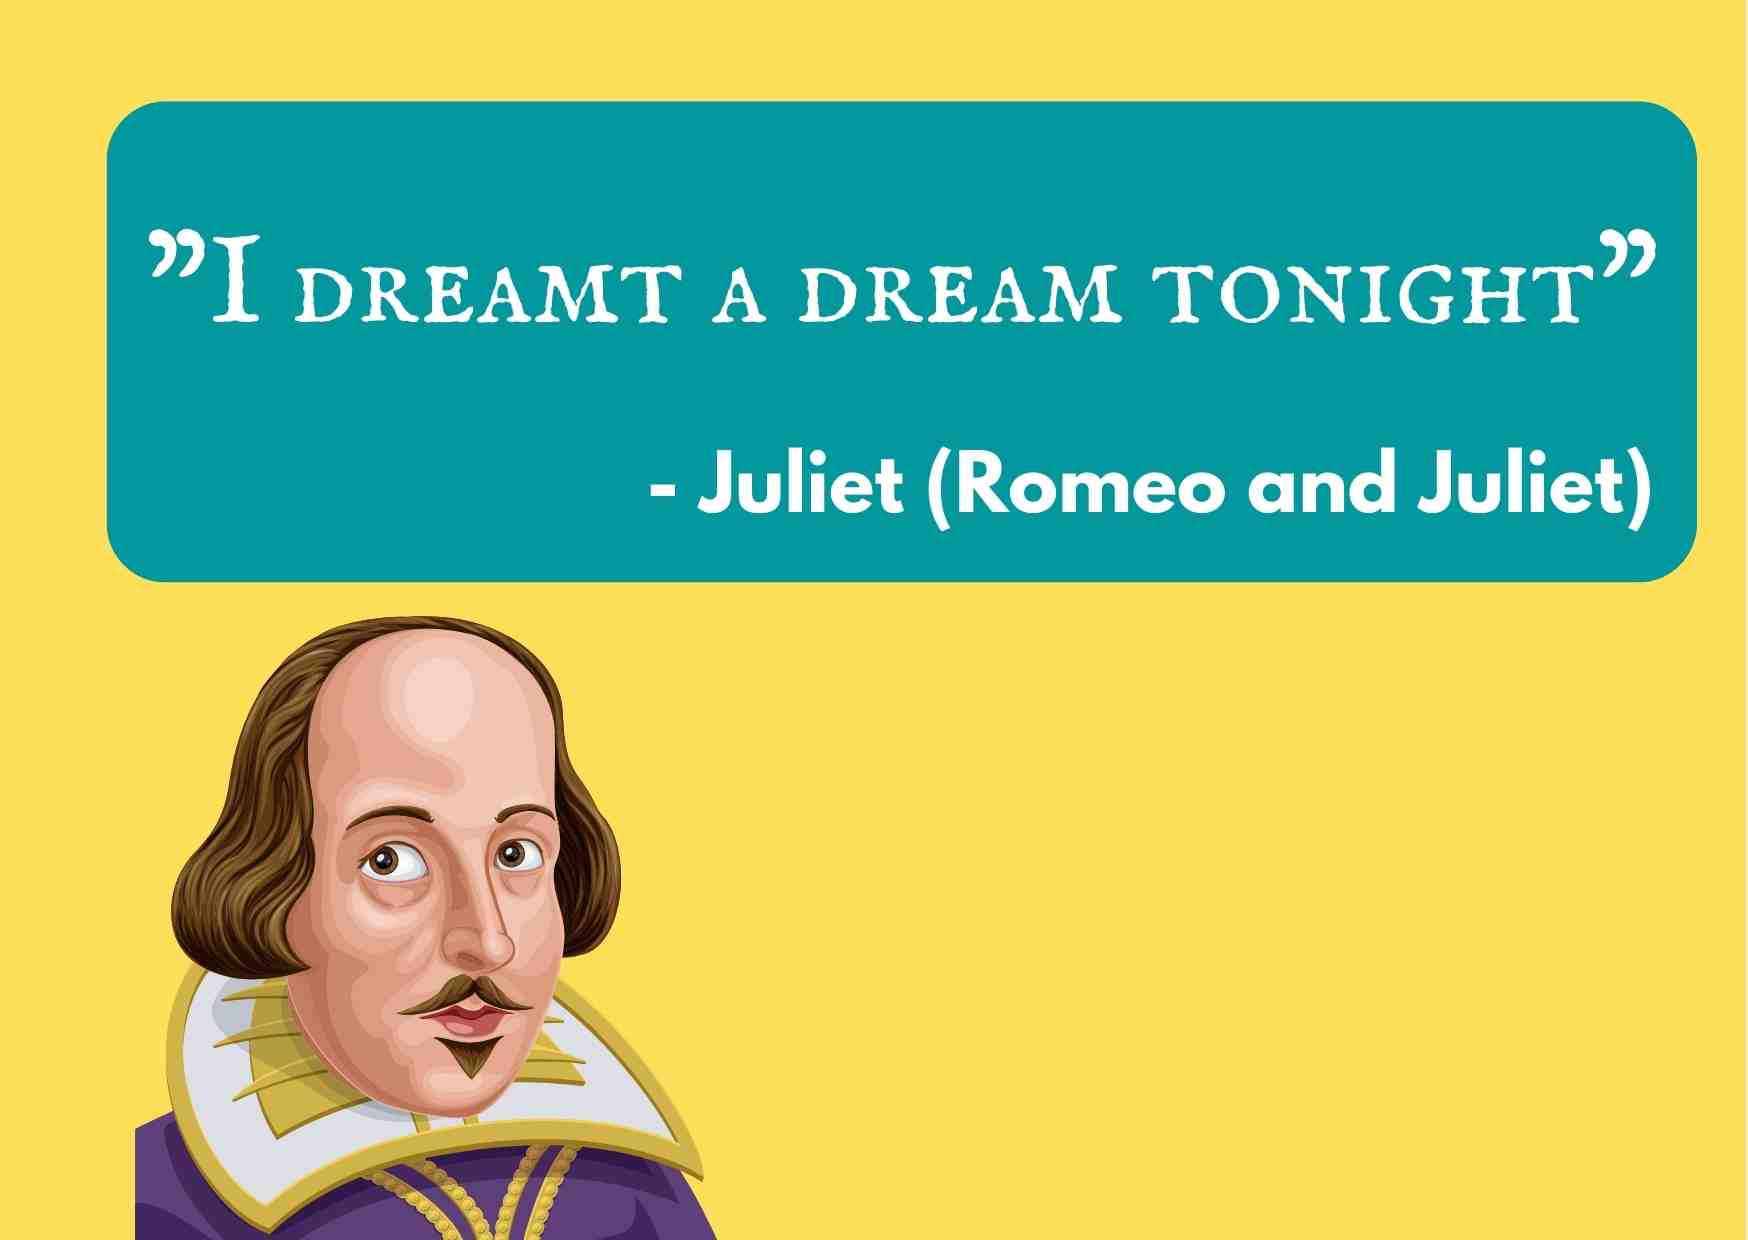 A graphic of William Shakespear with a quote from his "Romeo and Juliet:" "I dreamt a dream tonight" - Juliet